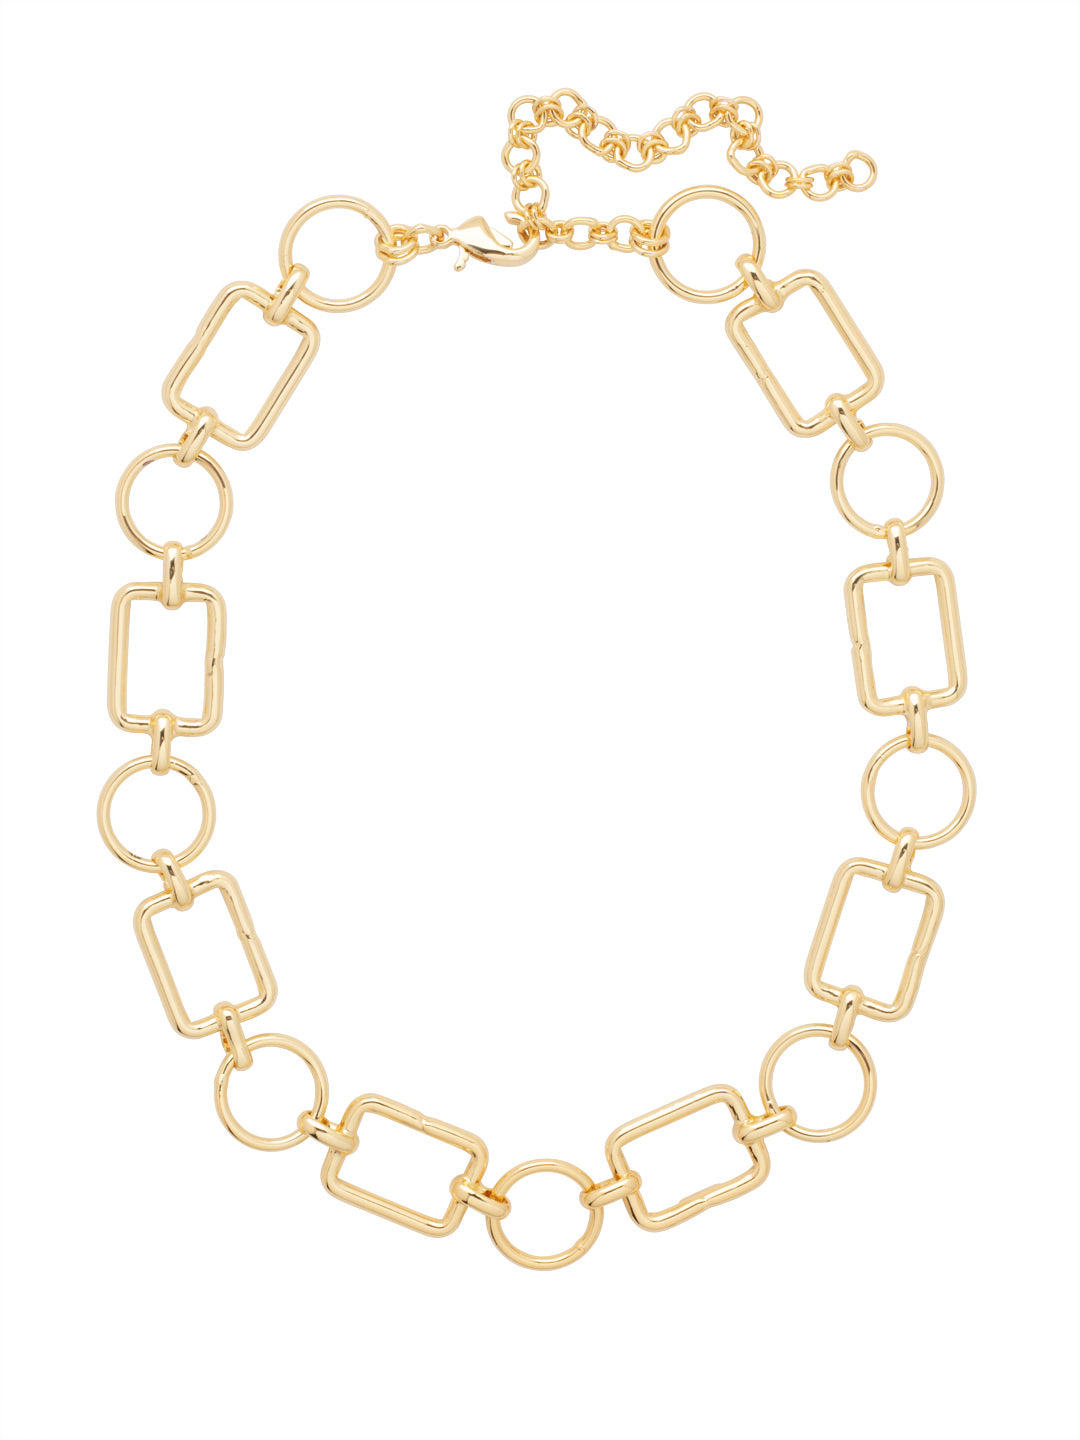 Geo Tennis Necklace - 4NFL14BGMTL - <p>The Geo Tennis Necklace features a variety of geometric shapes on an adjustable chain, secured by a lobster claw clasp. From Sorrelli's Bare Metallic collection in our Bright Gold-tone finish.</p>